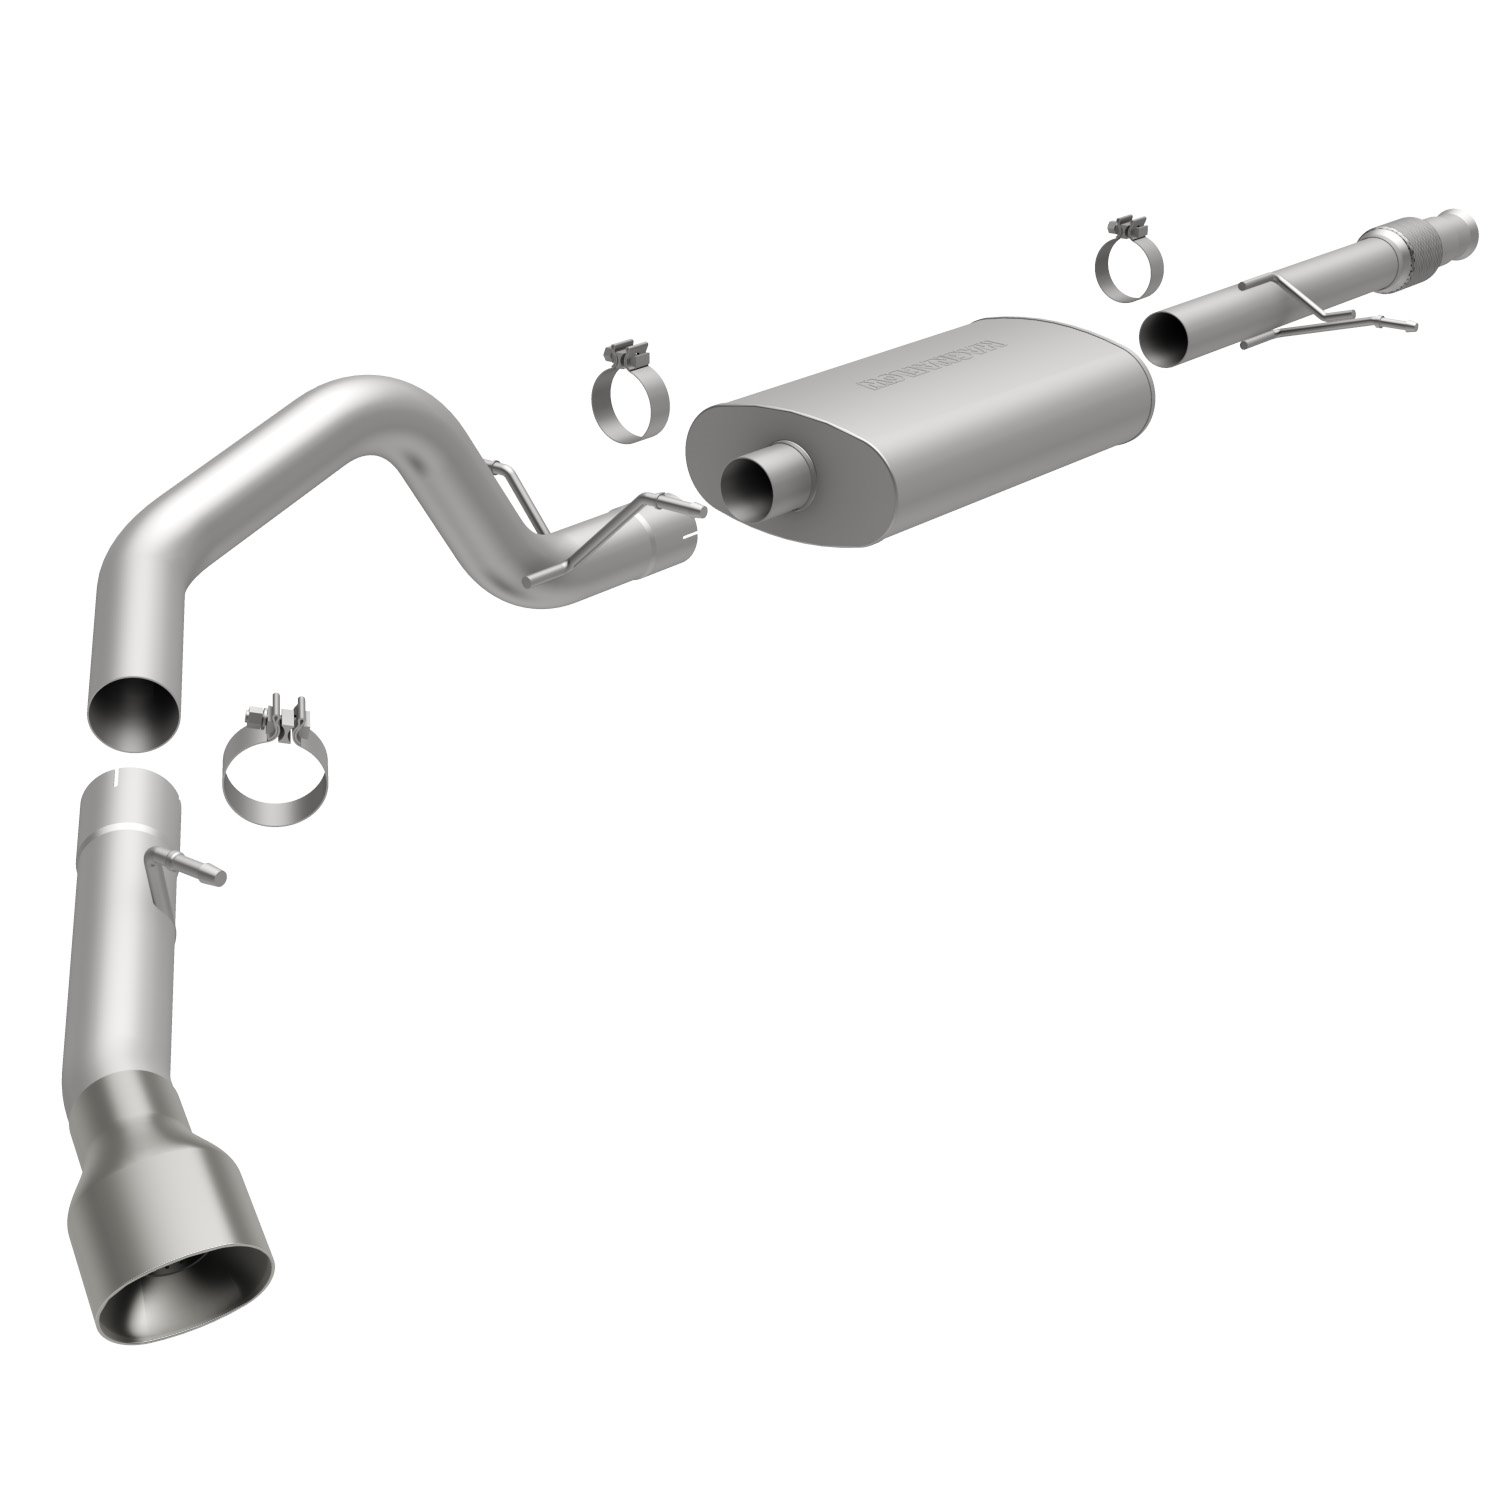 MF Series Cat-Back Exhaust System 2010-13 Chevy Avalanche 1500 5.3L V8